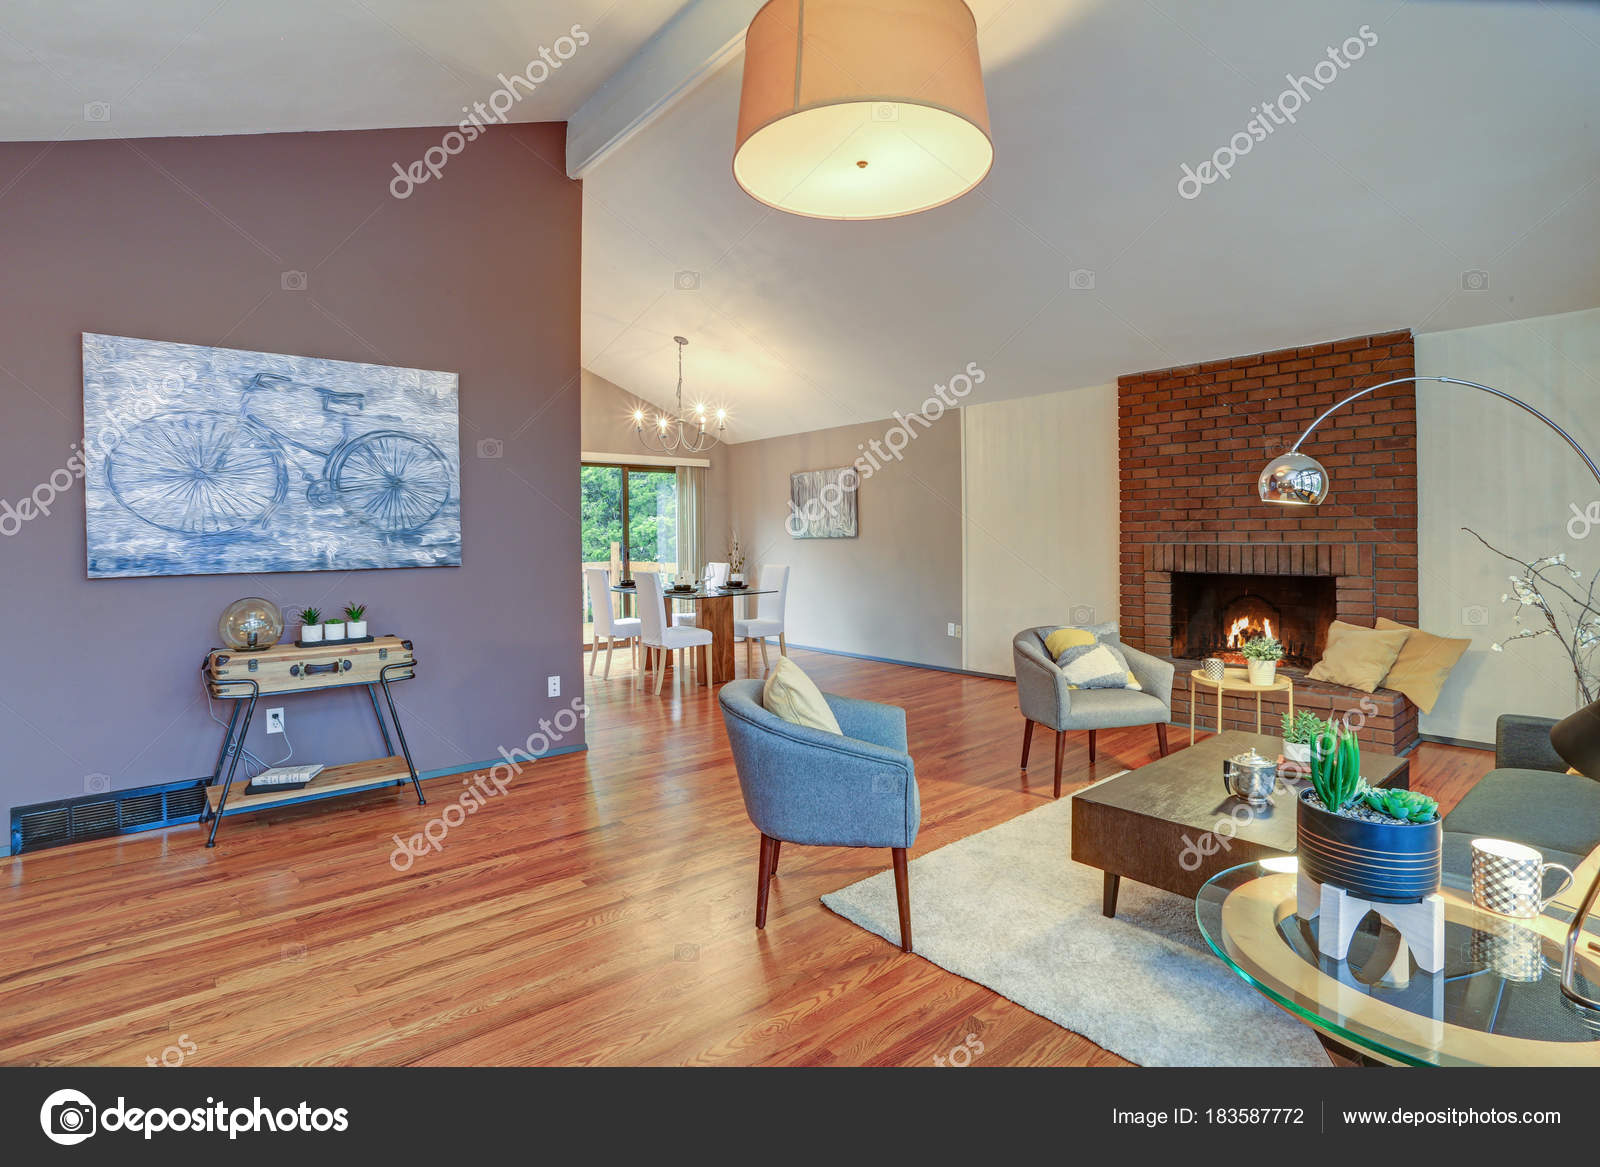 Lovely Spacious Open Floor Plan With Vaulted Ceiling Stock Photo